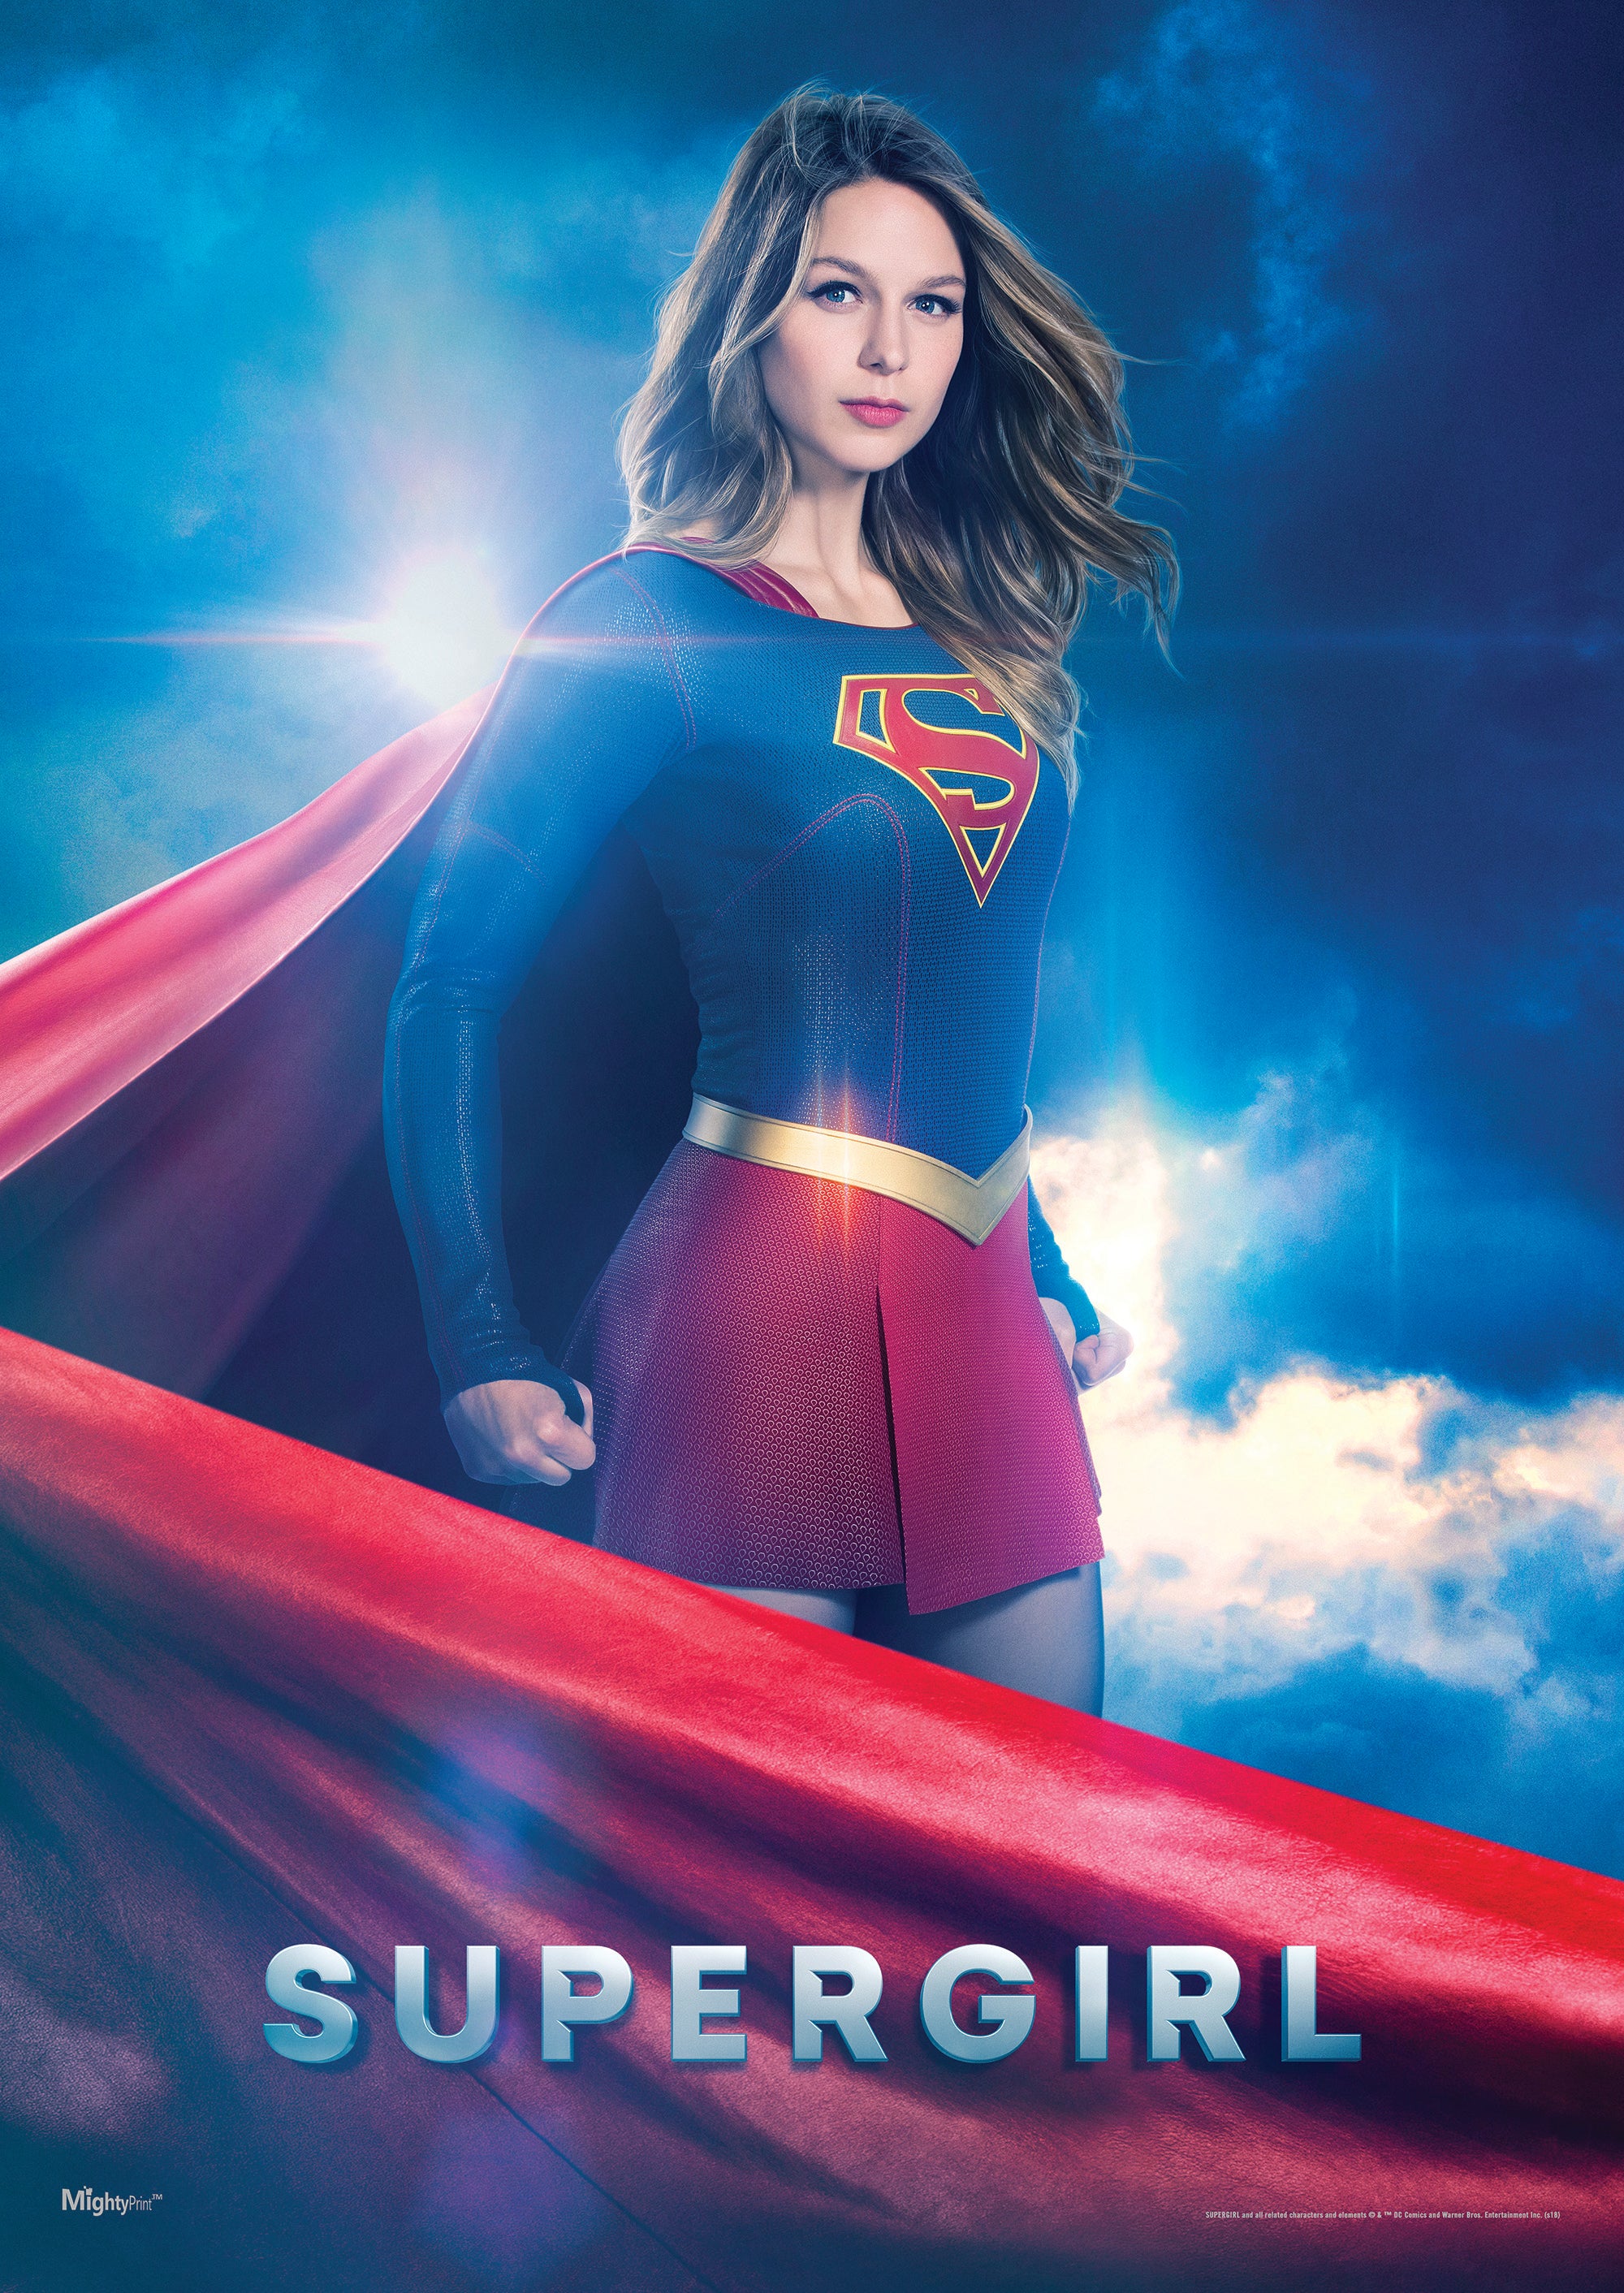 Supergirl (A Hero For Everyone) MightyPrint™ Wall Art MP17240494